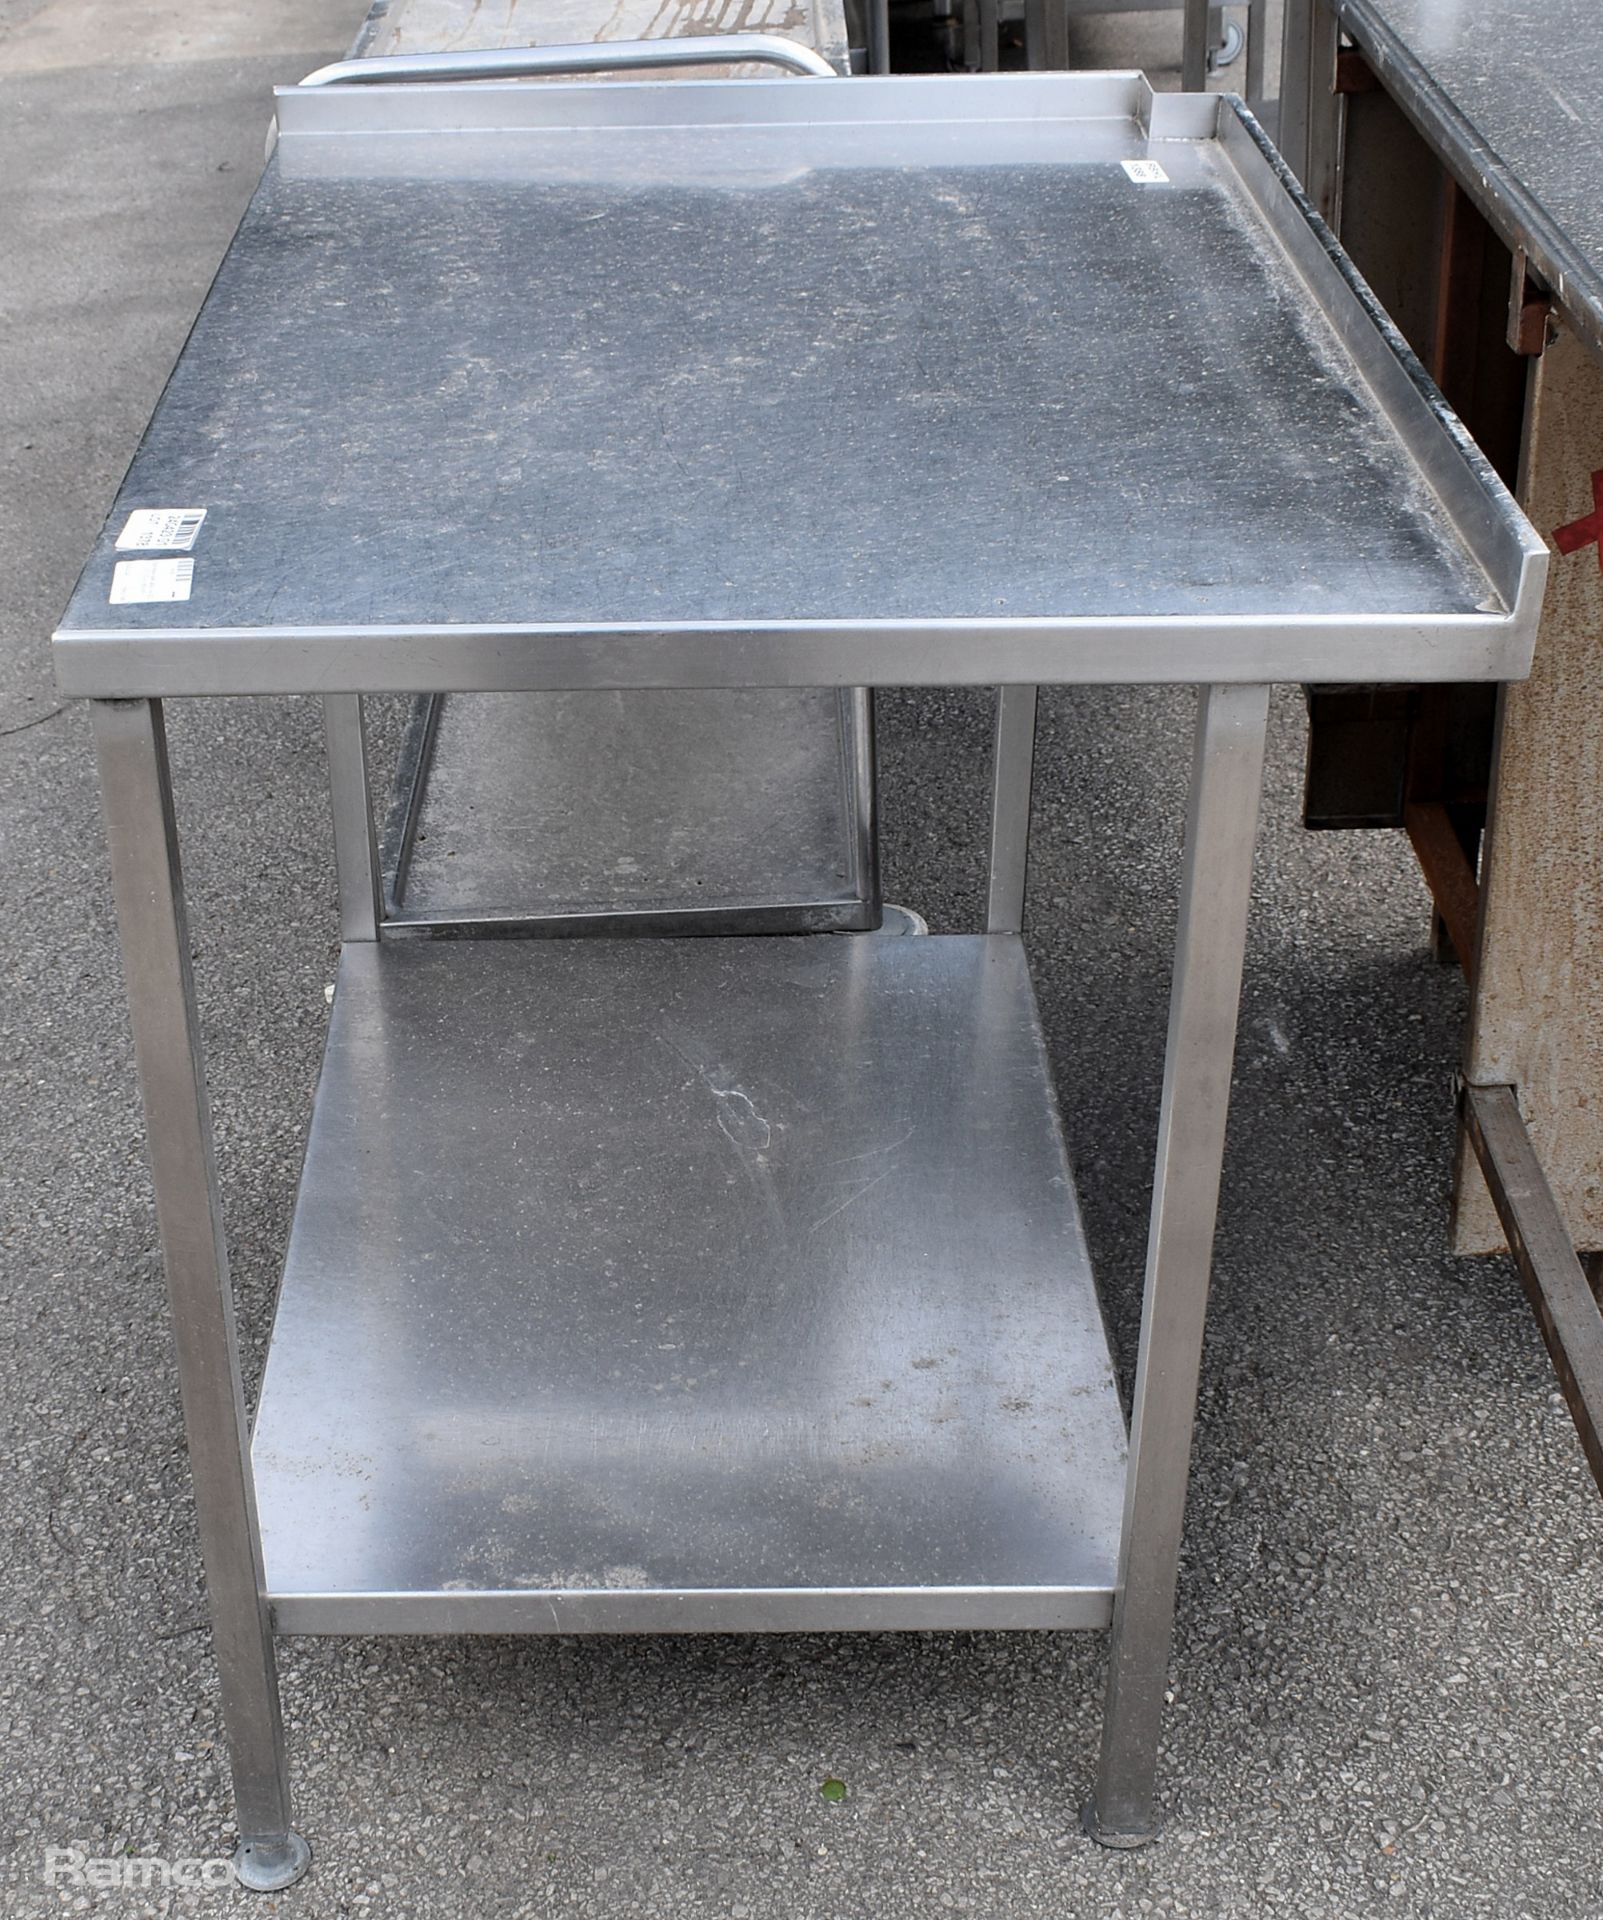 Stainless steel table - W 920 x D 700 x H 880mm - Image 2 of 2